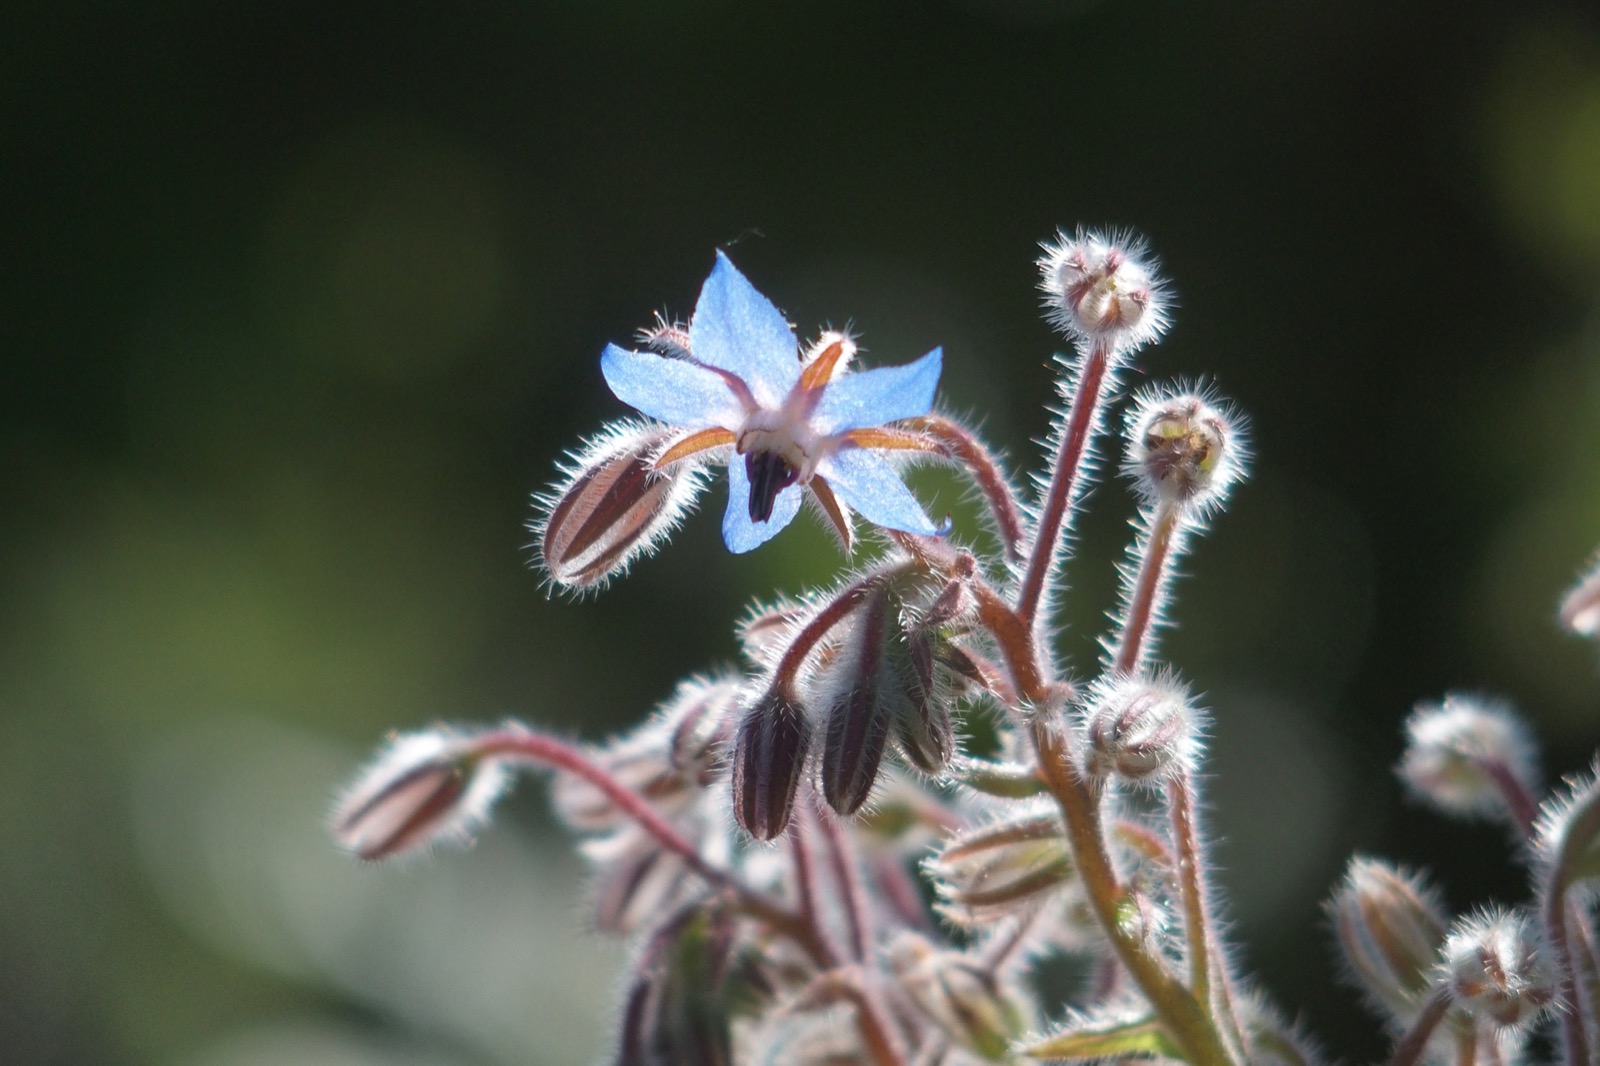 Closeup of a blue flow blossom with several closed buds surrounding it with hairs on the stems. Backlit.